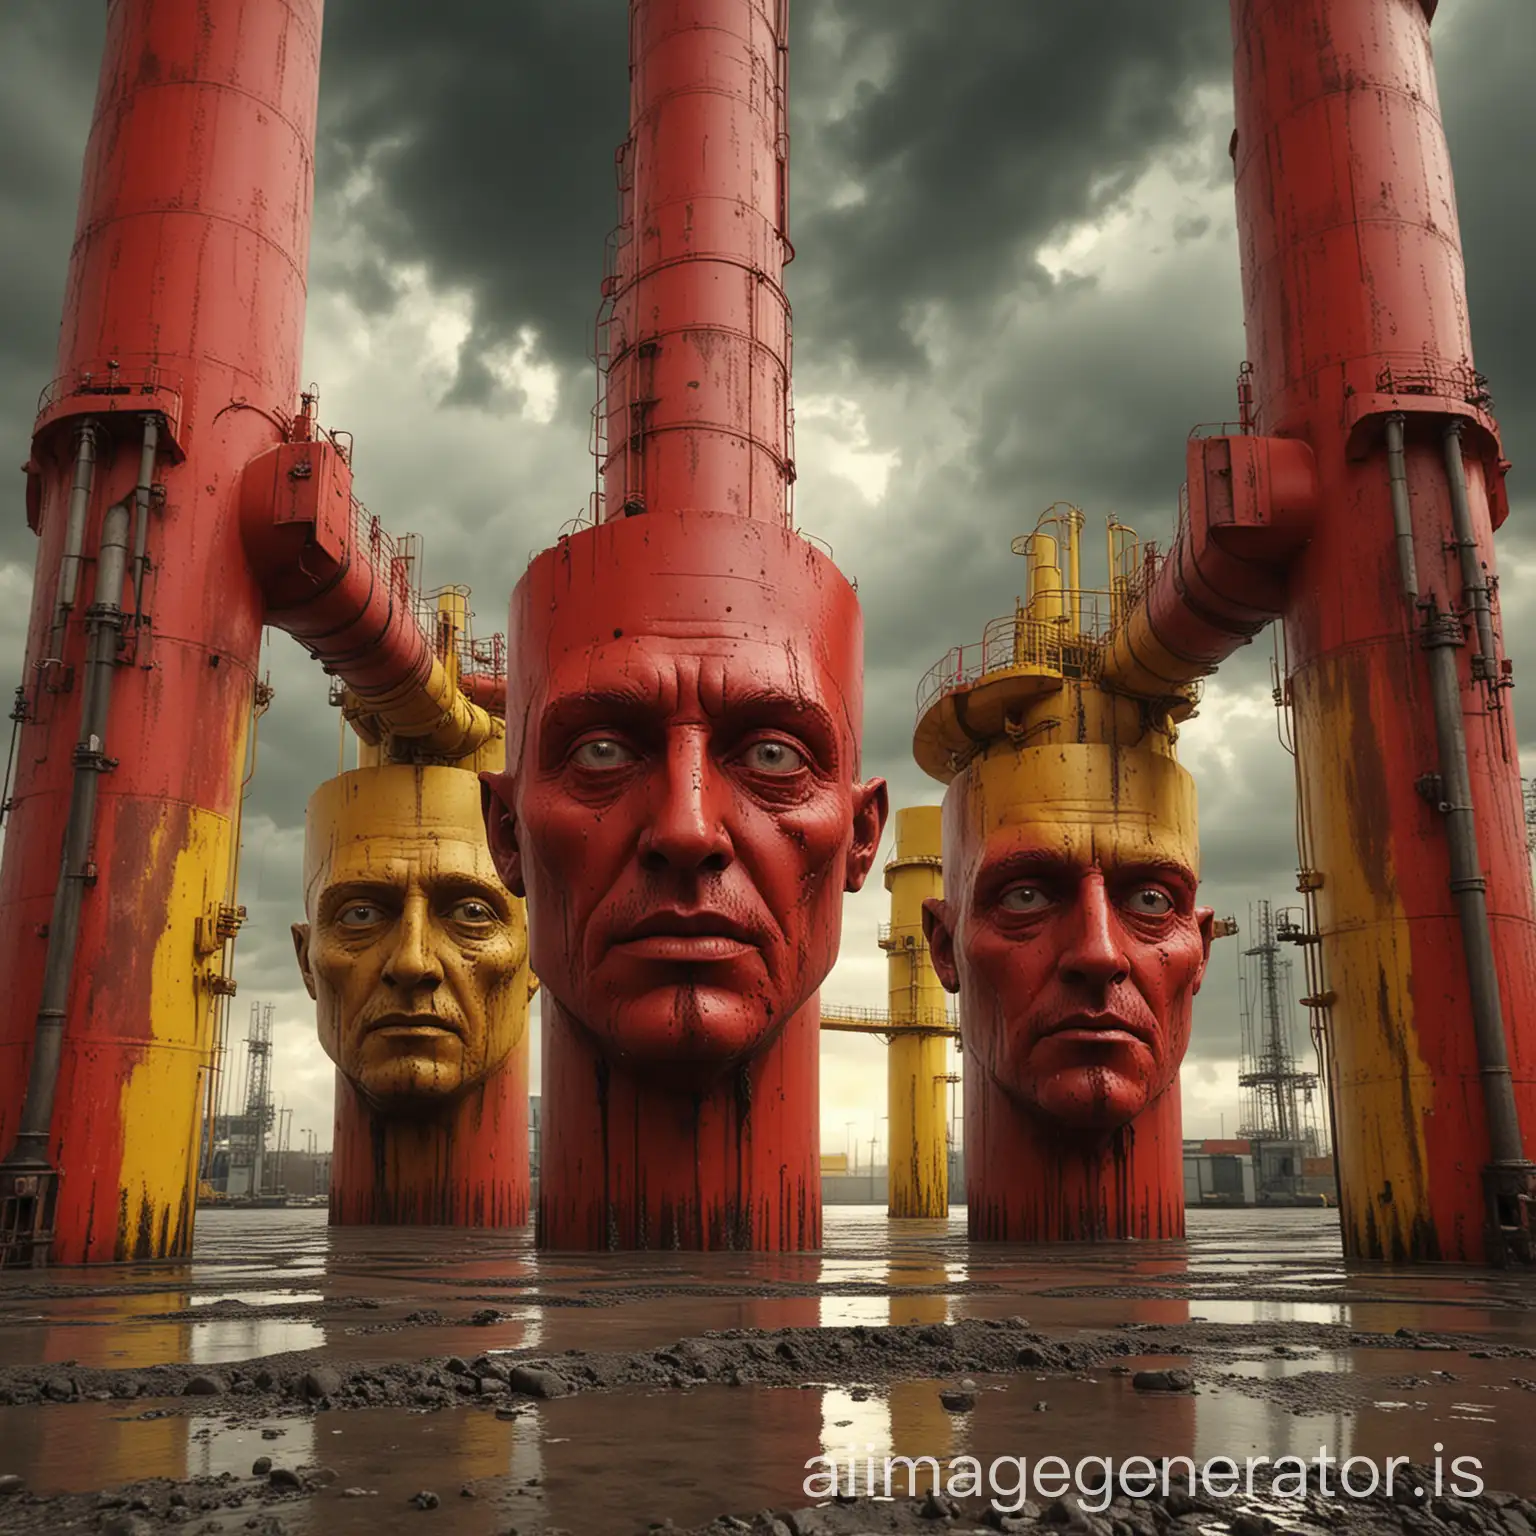 three surreal man-face-trapezoidal-aquasuiton bolts-tubes, concrete buildings, distillation petrochemical columns, red palette and acid yellow color, PL photo filter, black clouds, Ray Tracing Global Illumination, Optics, Scattering, Glow, insanely detailed and intricate, superdetailed